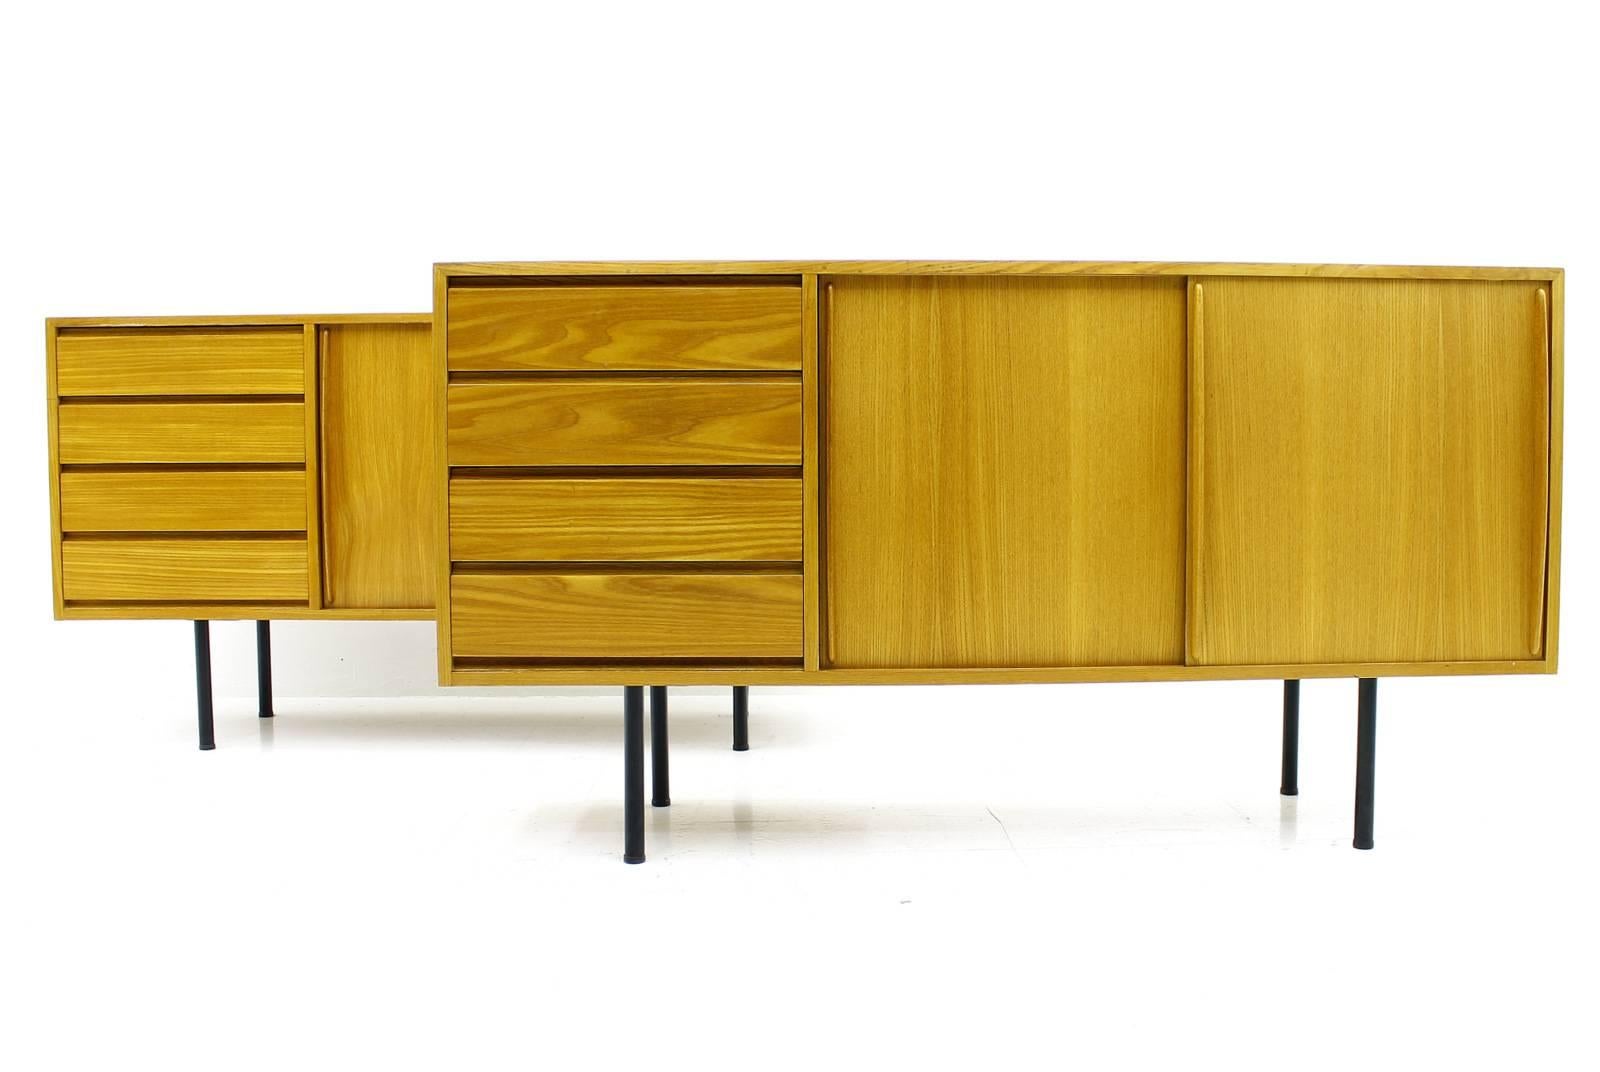 Very rare ashwood sideboard by Ollie Borg, Asko, Finland, circa 1950s. Four drawers and two sliding doors. Metal legs.
Measurements: Width 150 cm, depth 43 cm, height 80 cm.

Excellent condition!

Worldwide shipping.
 